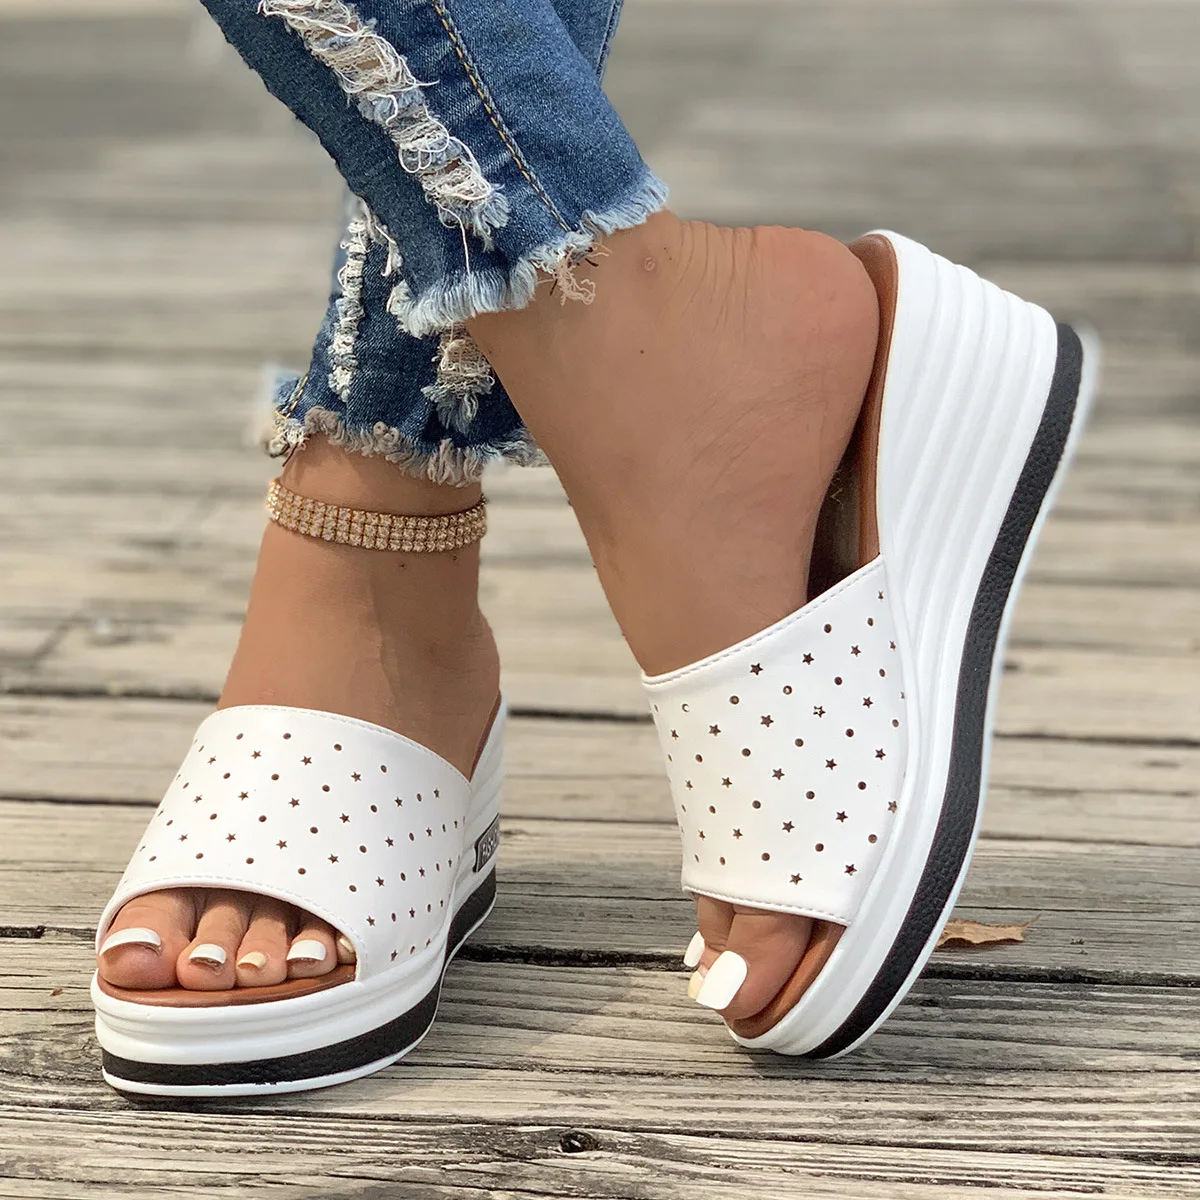 

Summer New Fashion Fish Mouth Slippers for Women Wedge Heel Peep Toe Sexy Casual Breathable Women's Plarform Sandals for Women